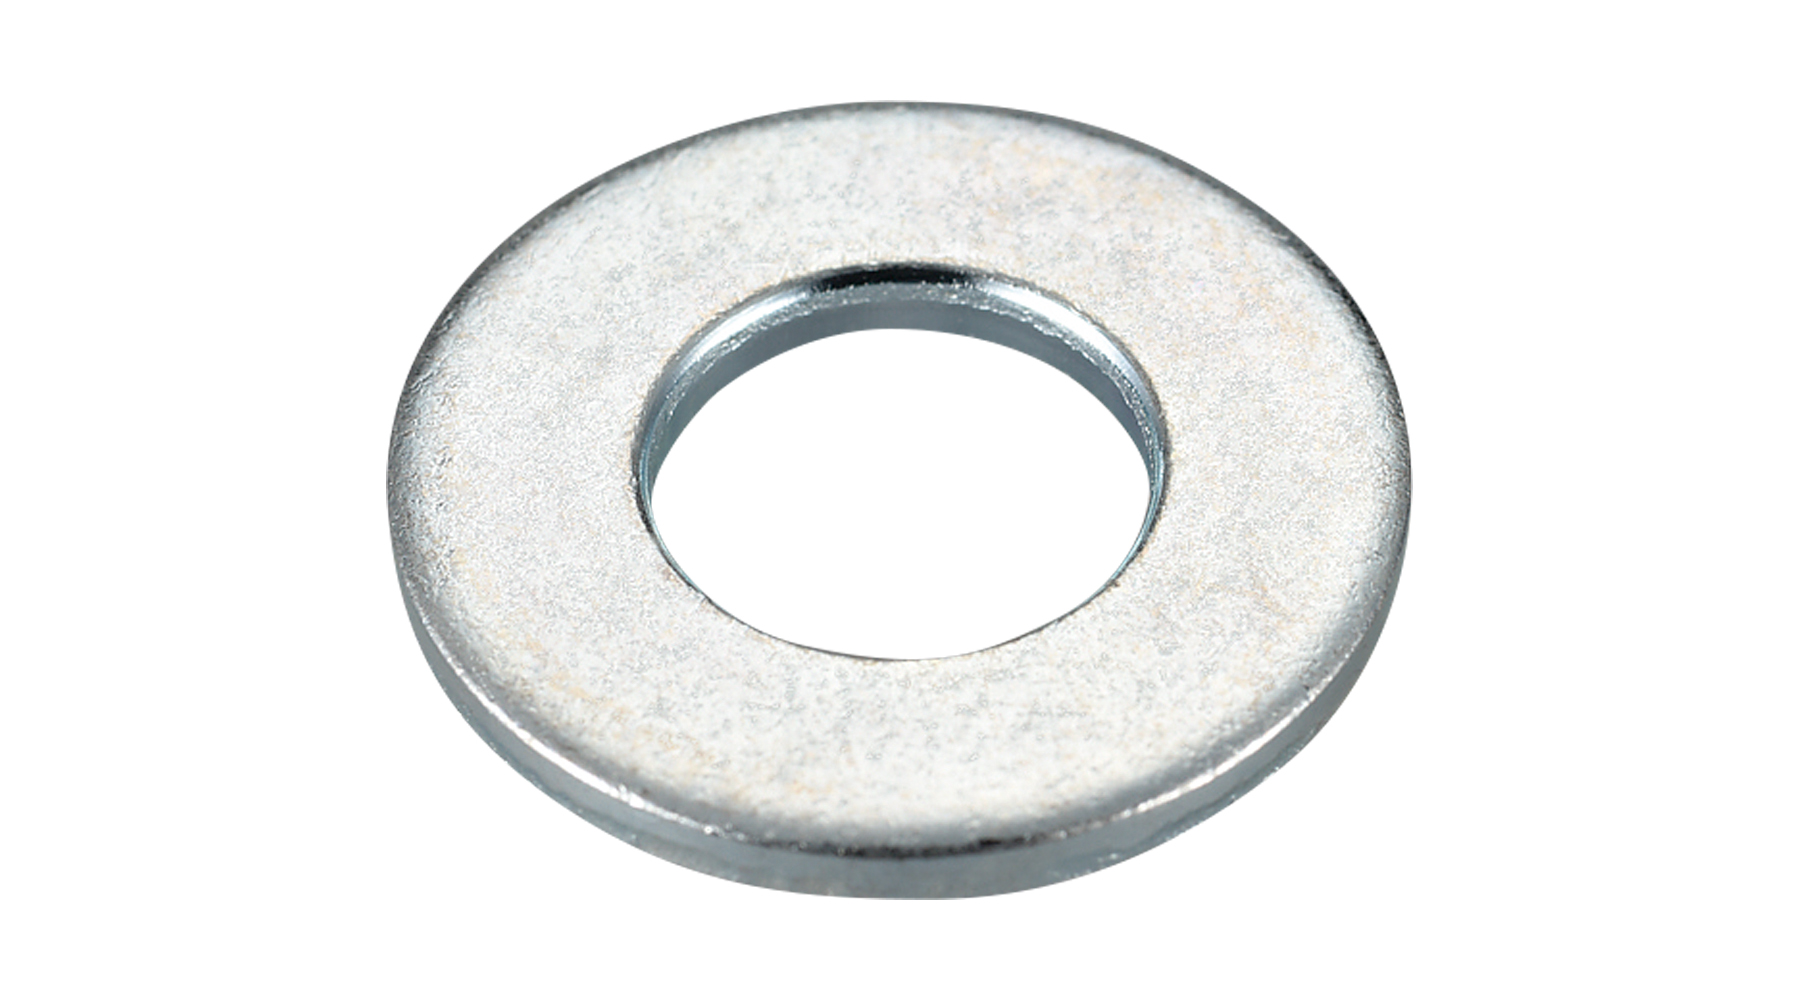 FLAT WASHER(TRIVALENT)